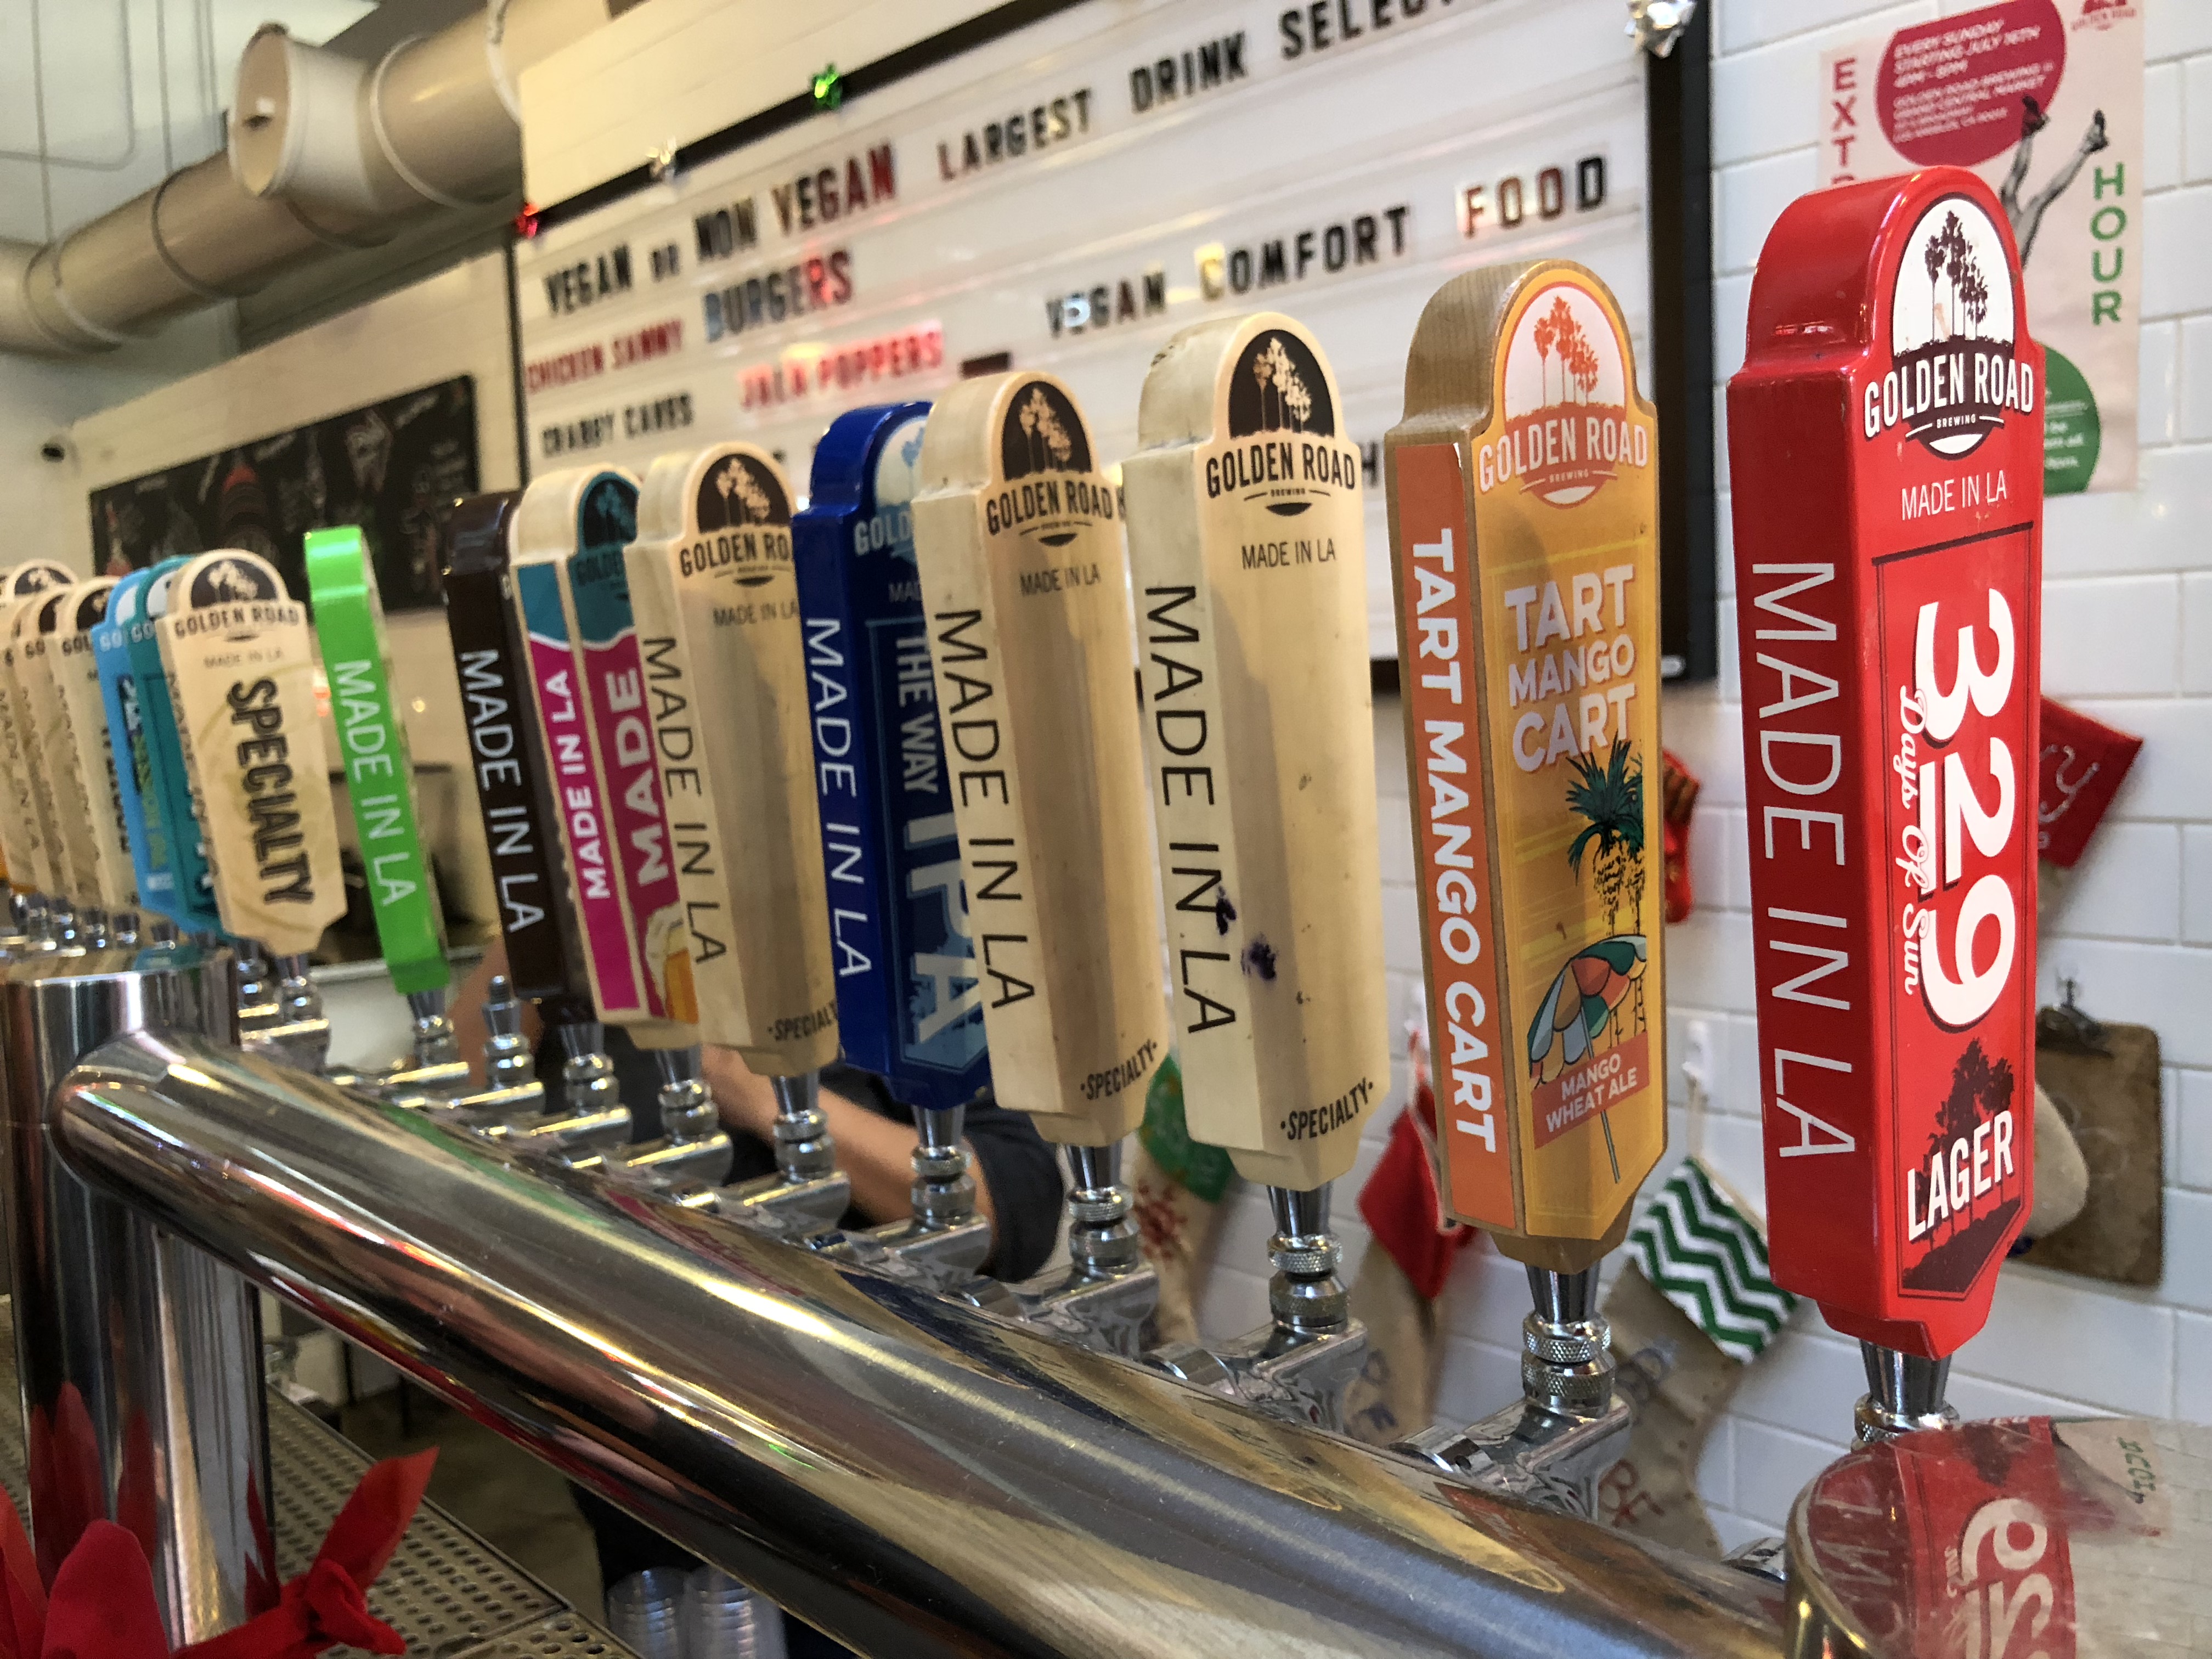 Tap handles at Golden Road Brewing's tap room at Grand Central Market in Los Angeles.